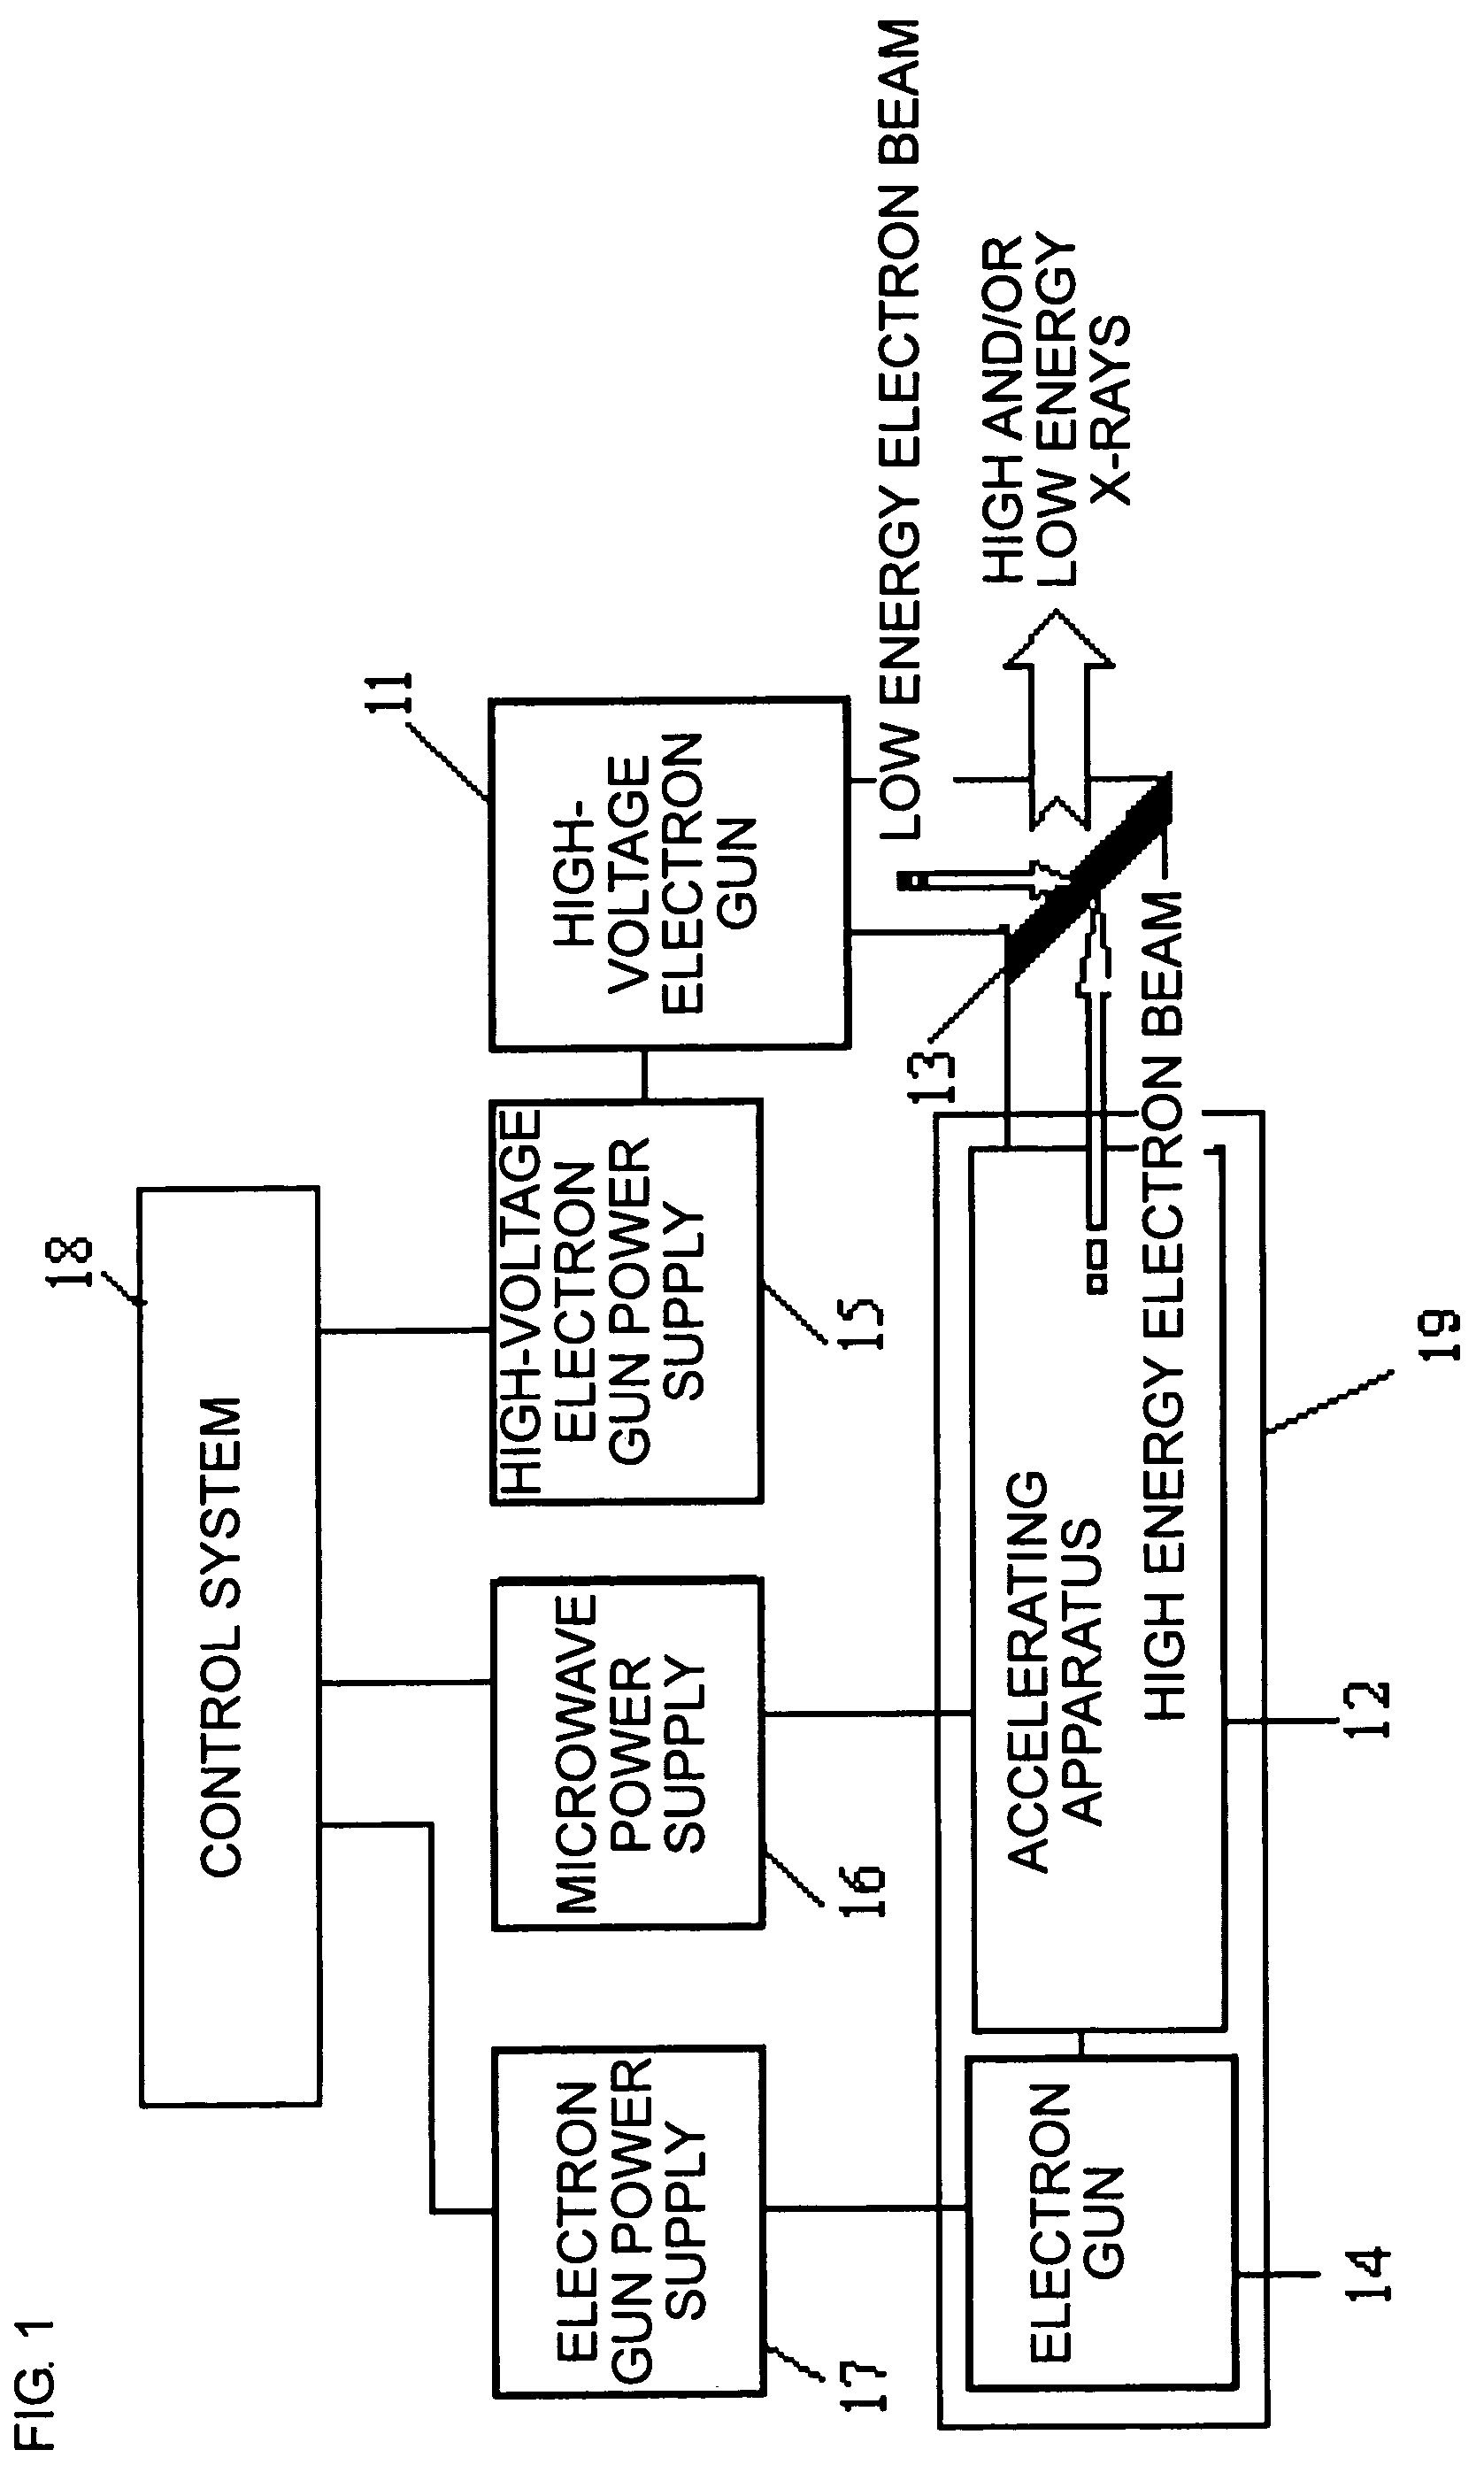 Device for outputting high and/or low energy X-rays